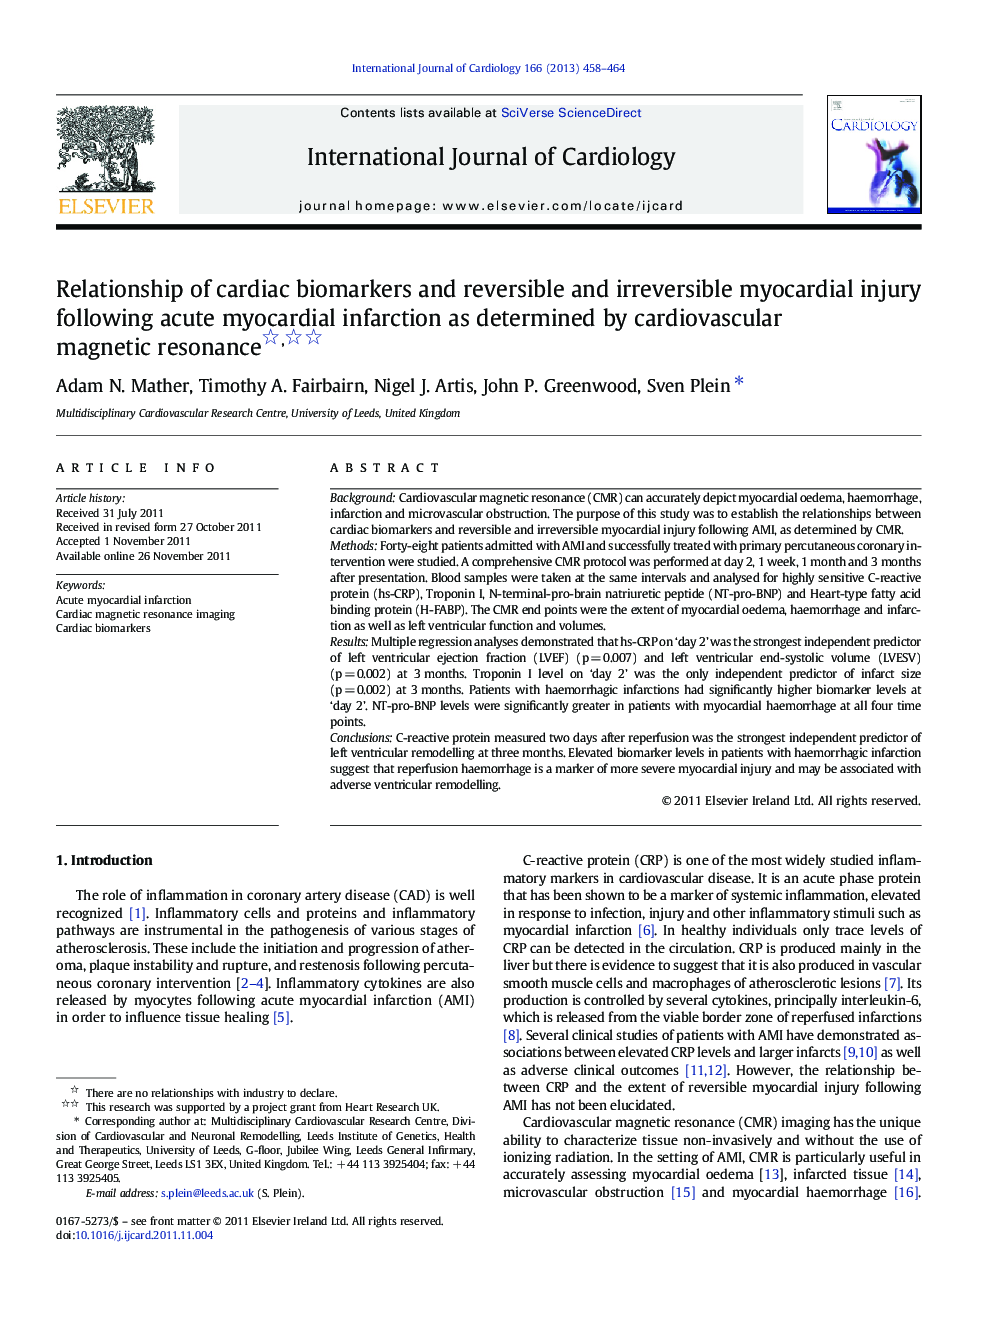 Relationship of cardiac biomarkers and reversible and irreversible myocardial injury following acute myocardial infarction as determined by cardiovascular magnetic resonance